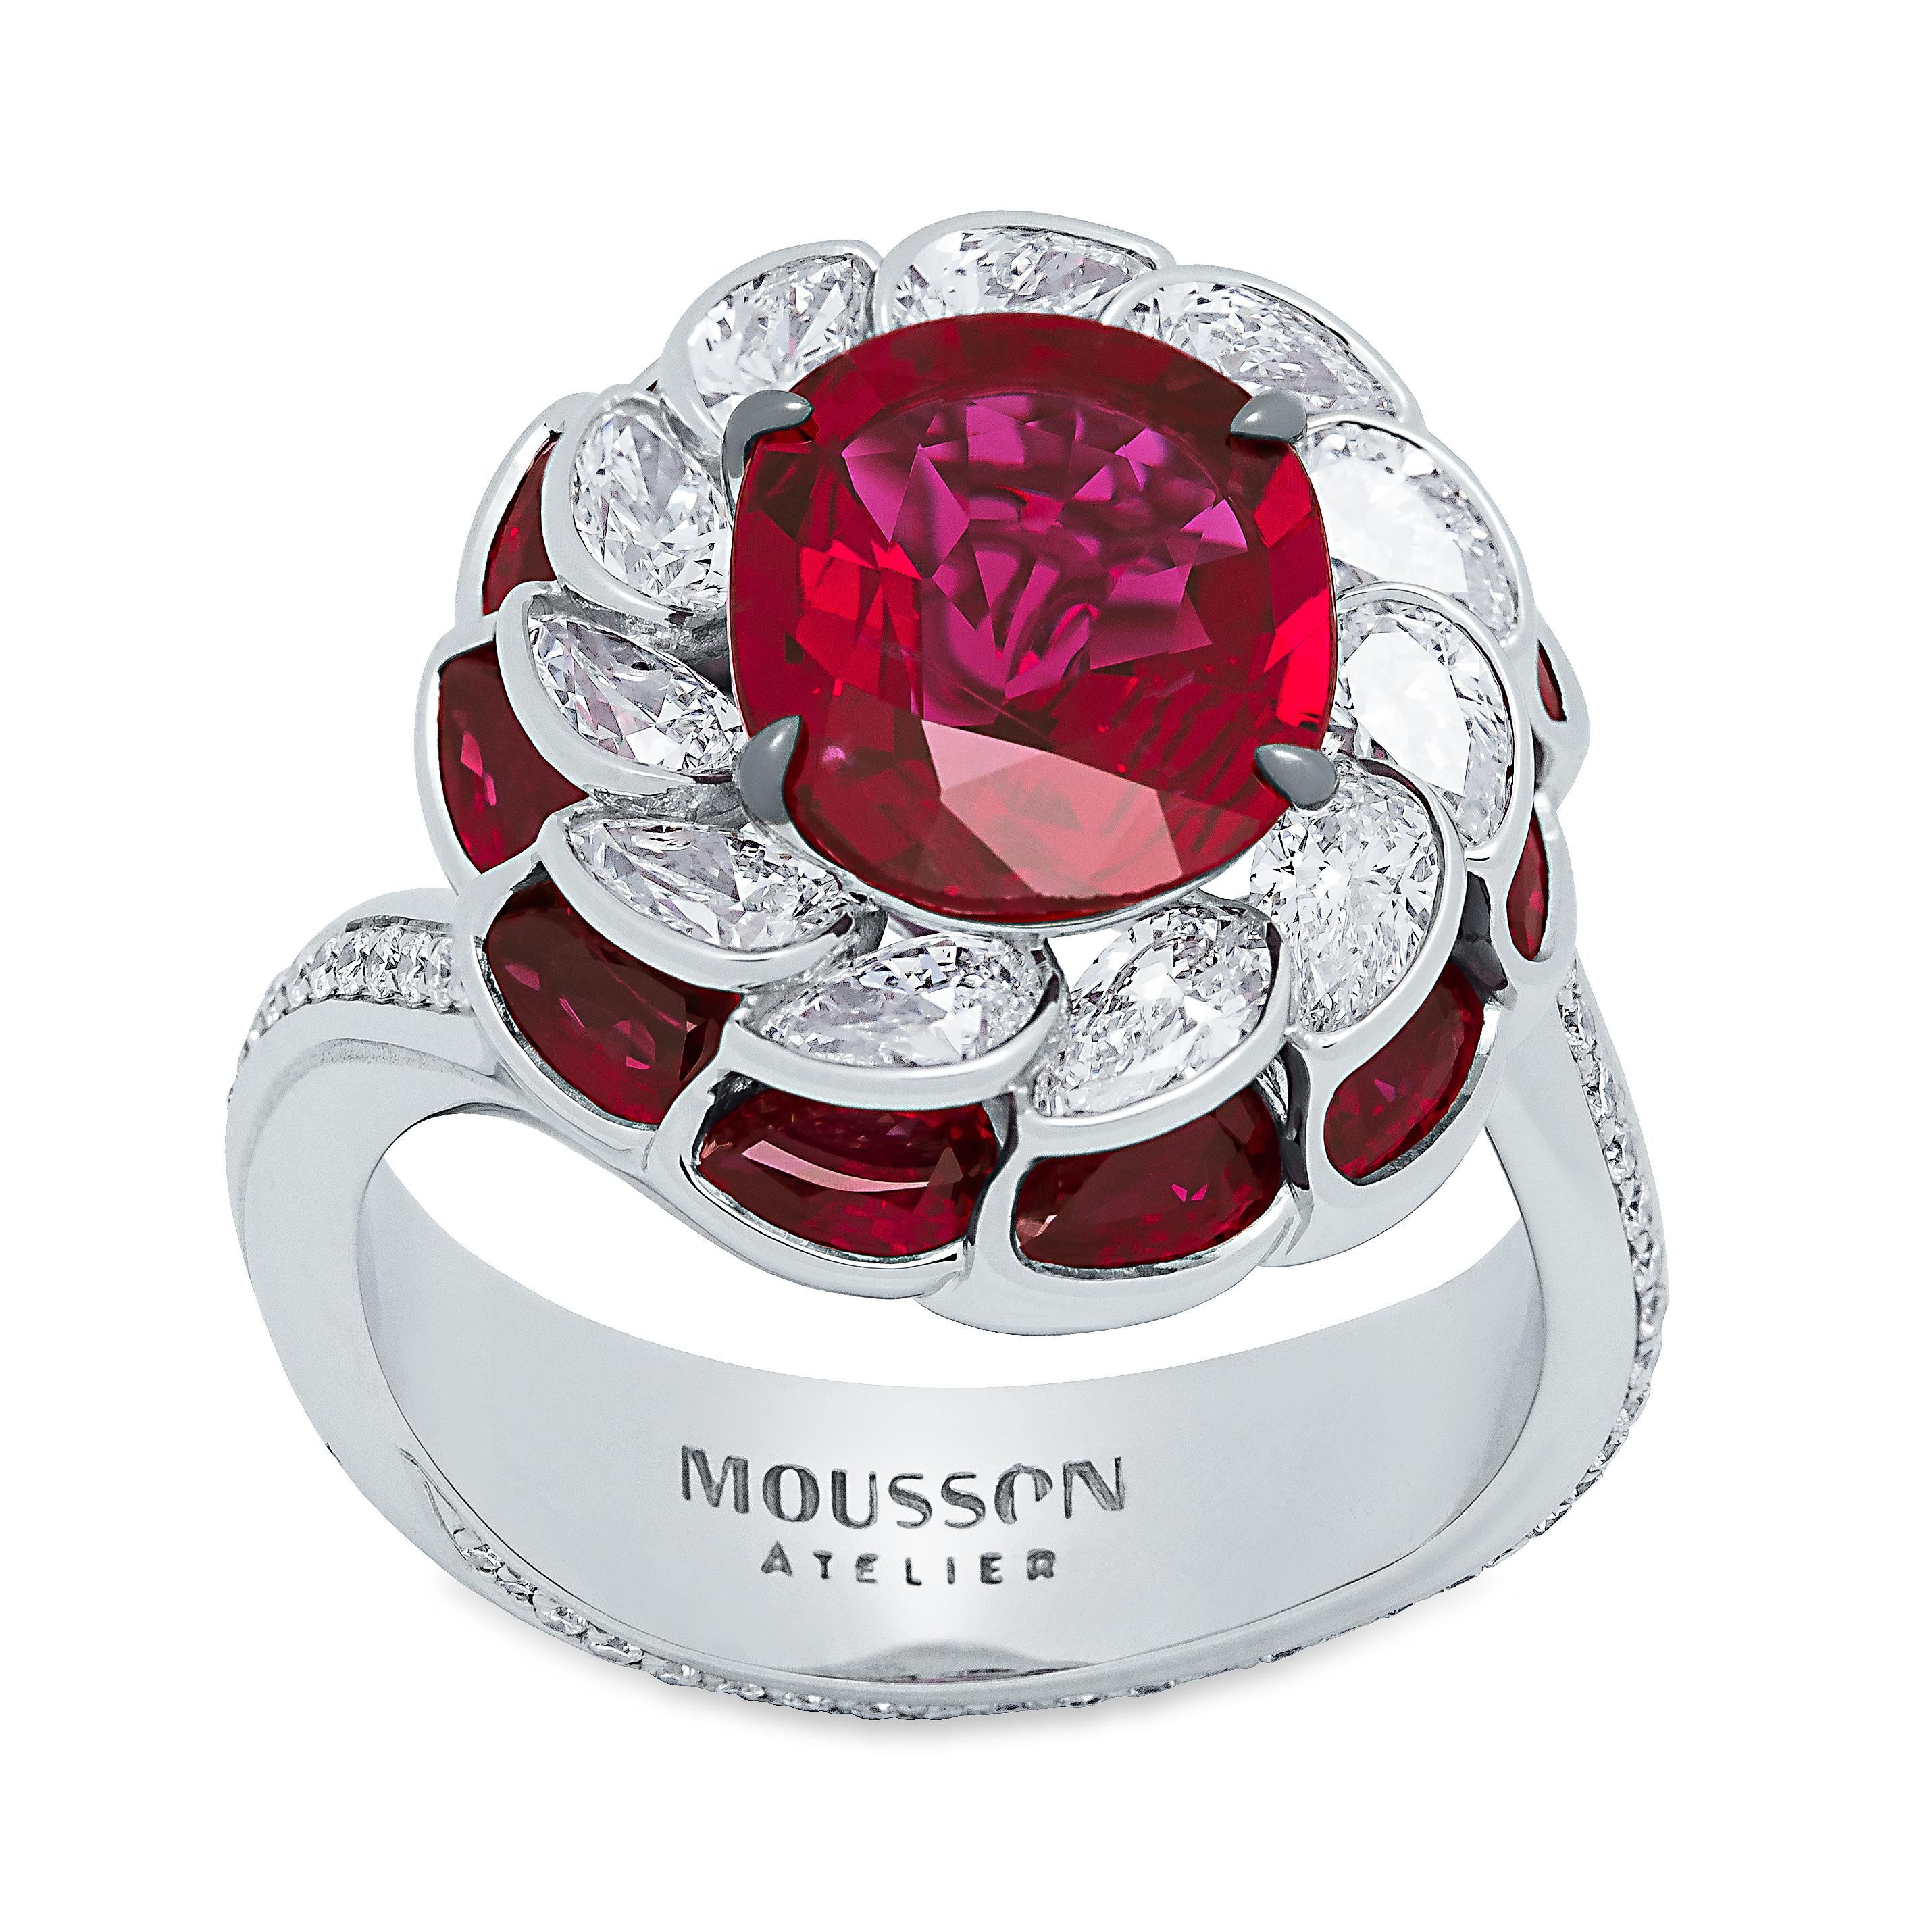 GRS Certified 2,98 Carat Ruby Diamond 18 Karat White Gold Ring

We bring to your attention our new Ring from the 